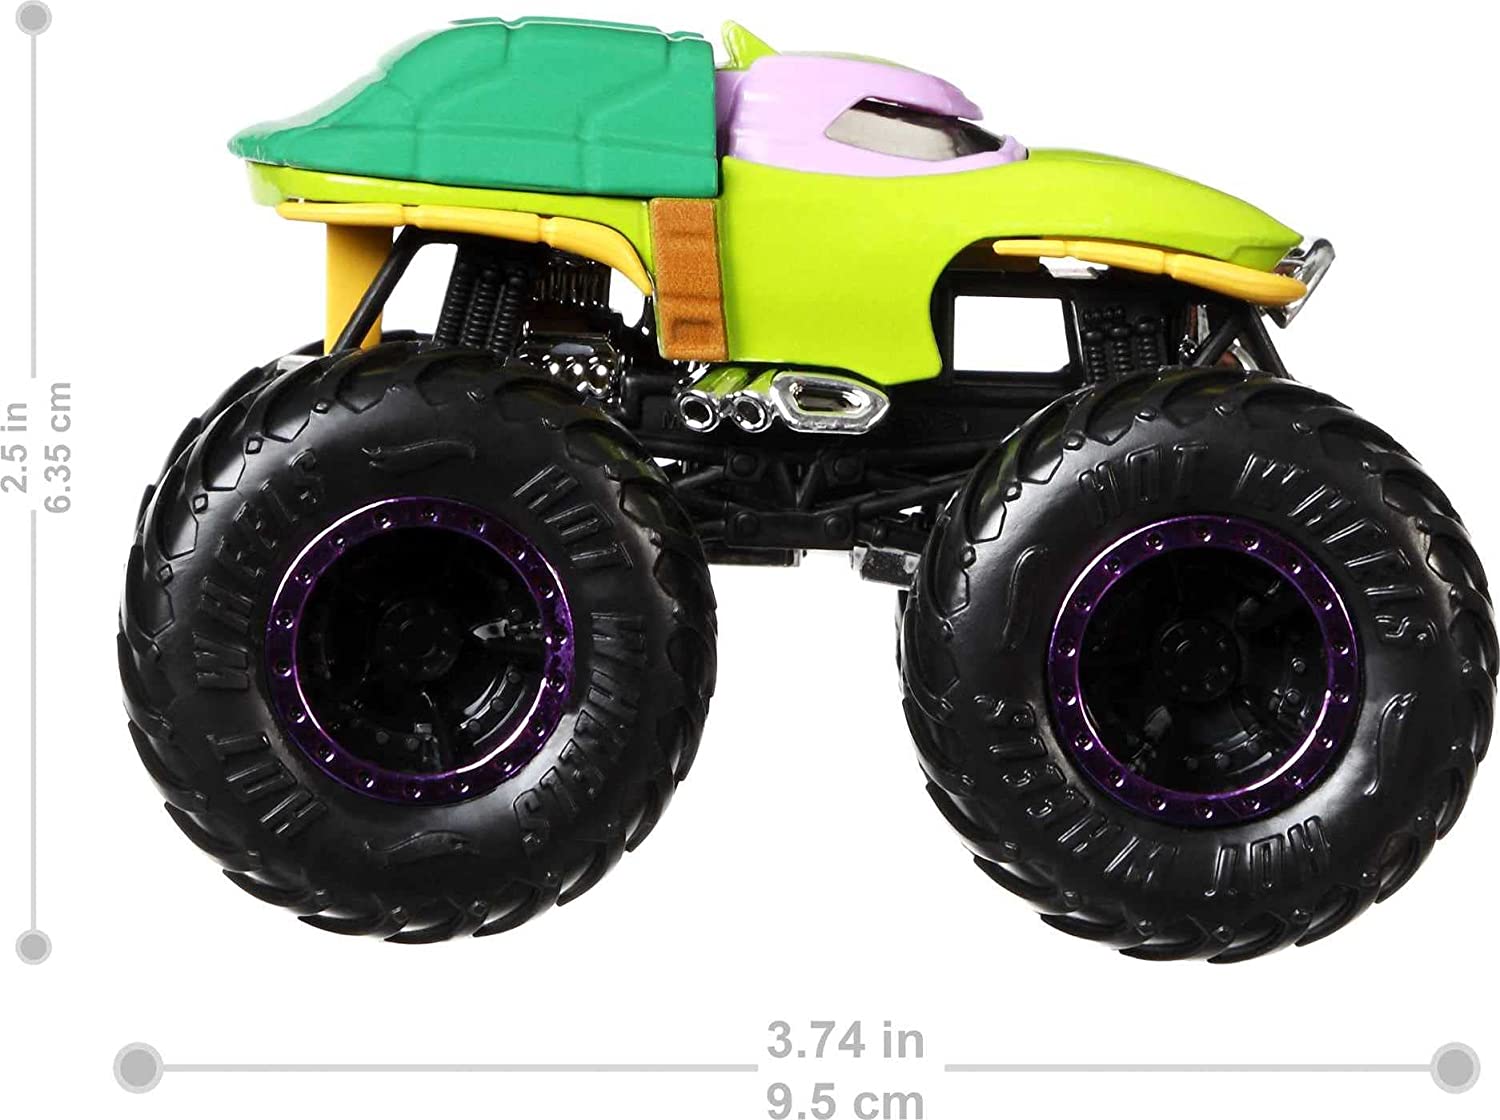 Hot Wheels Monster Trucks 1:64 Scale 2-Packs, with Giant Wheels and for Ages 3 Years Old & Older (Decorations May Vary)